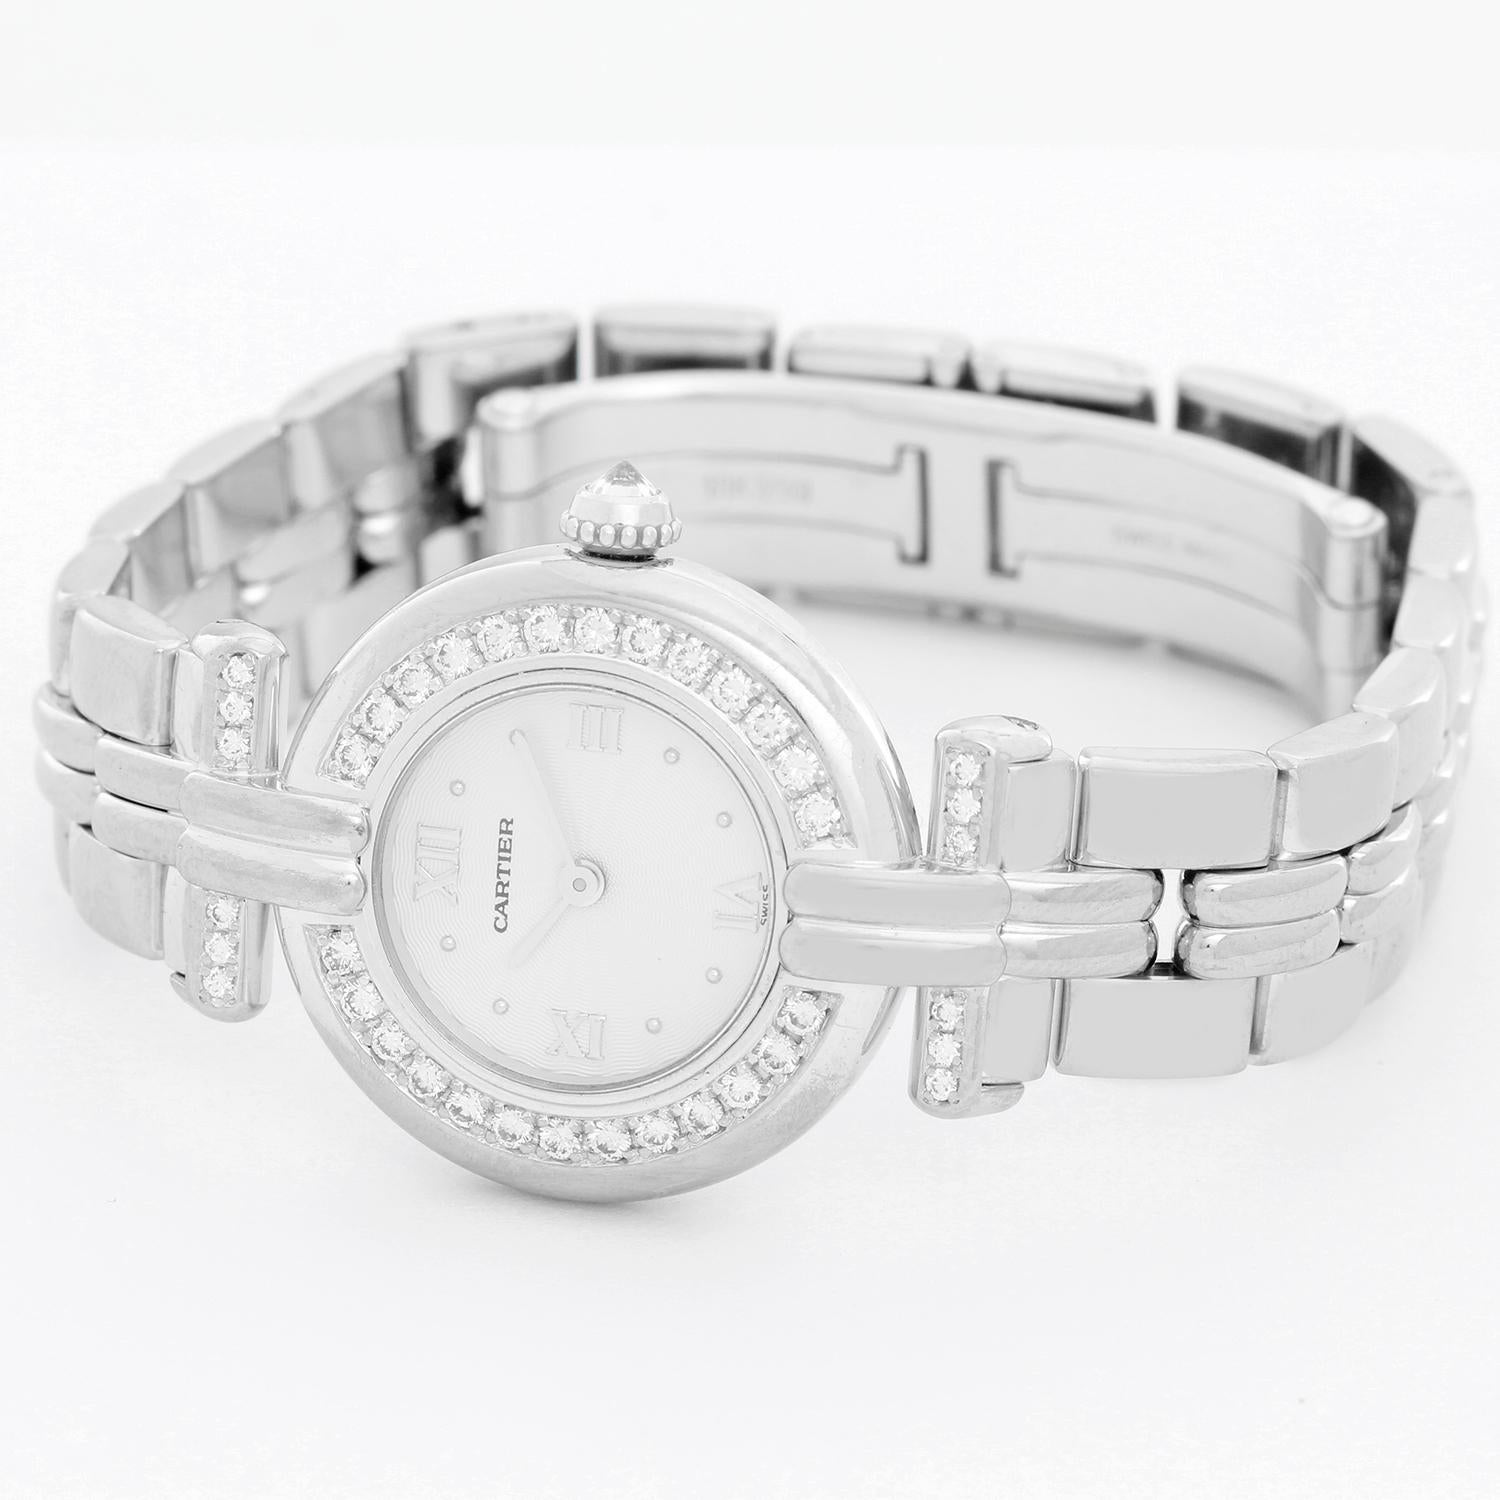 Cartier 18K White Gold Diamond Ladies Watch - Quartz. 18K White gold case ( 24 mm ); diamond bezel. Silver guilloche dial with Roman numerals. 18K White gold bracelet with diamond lugs. Pre-owned with custom box.